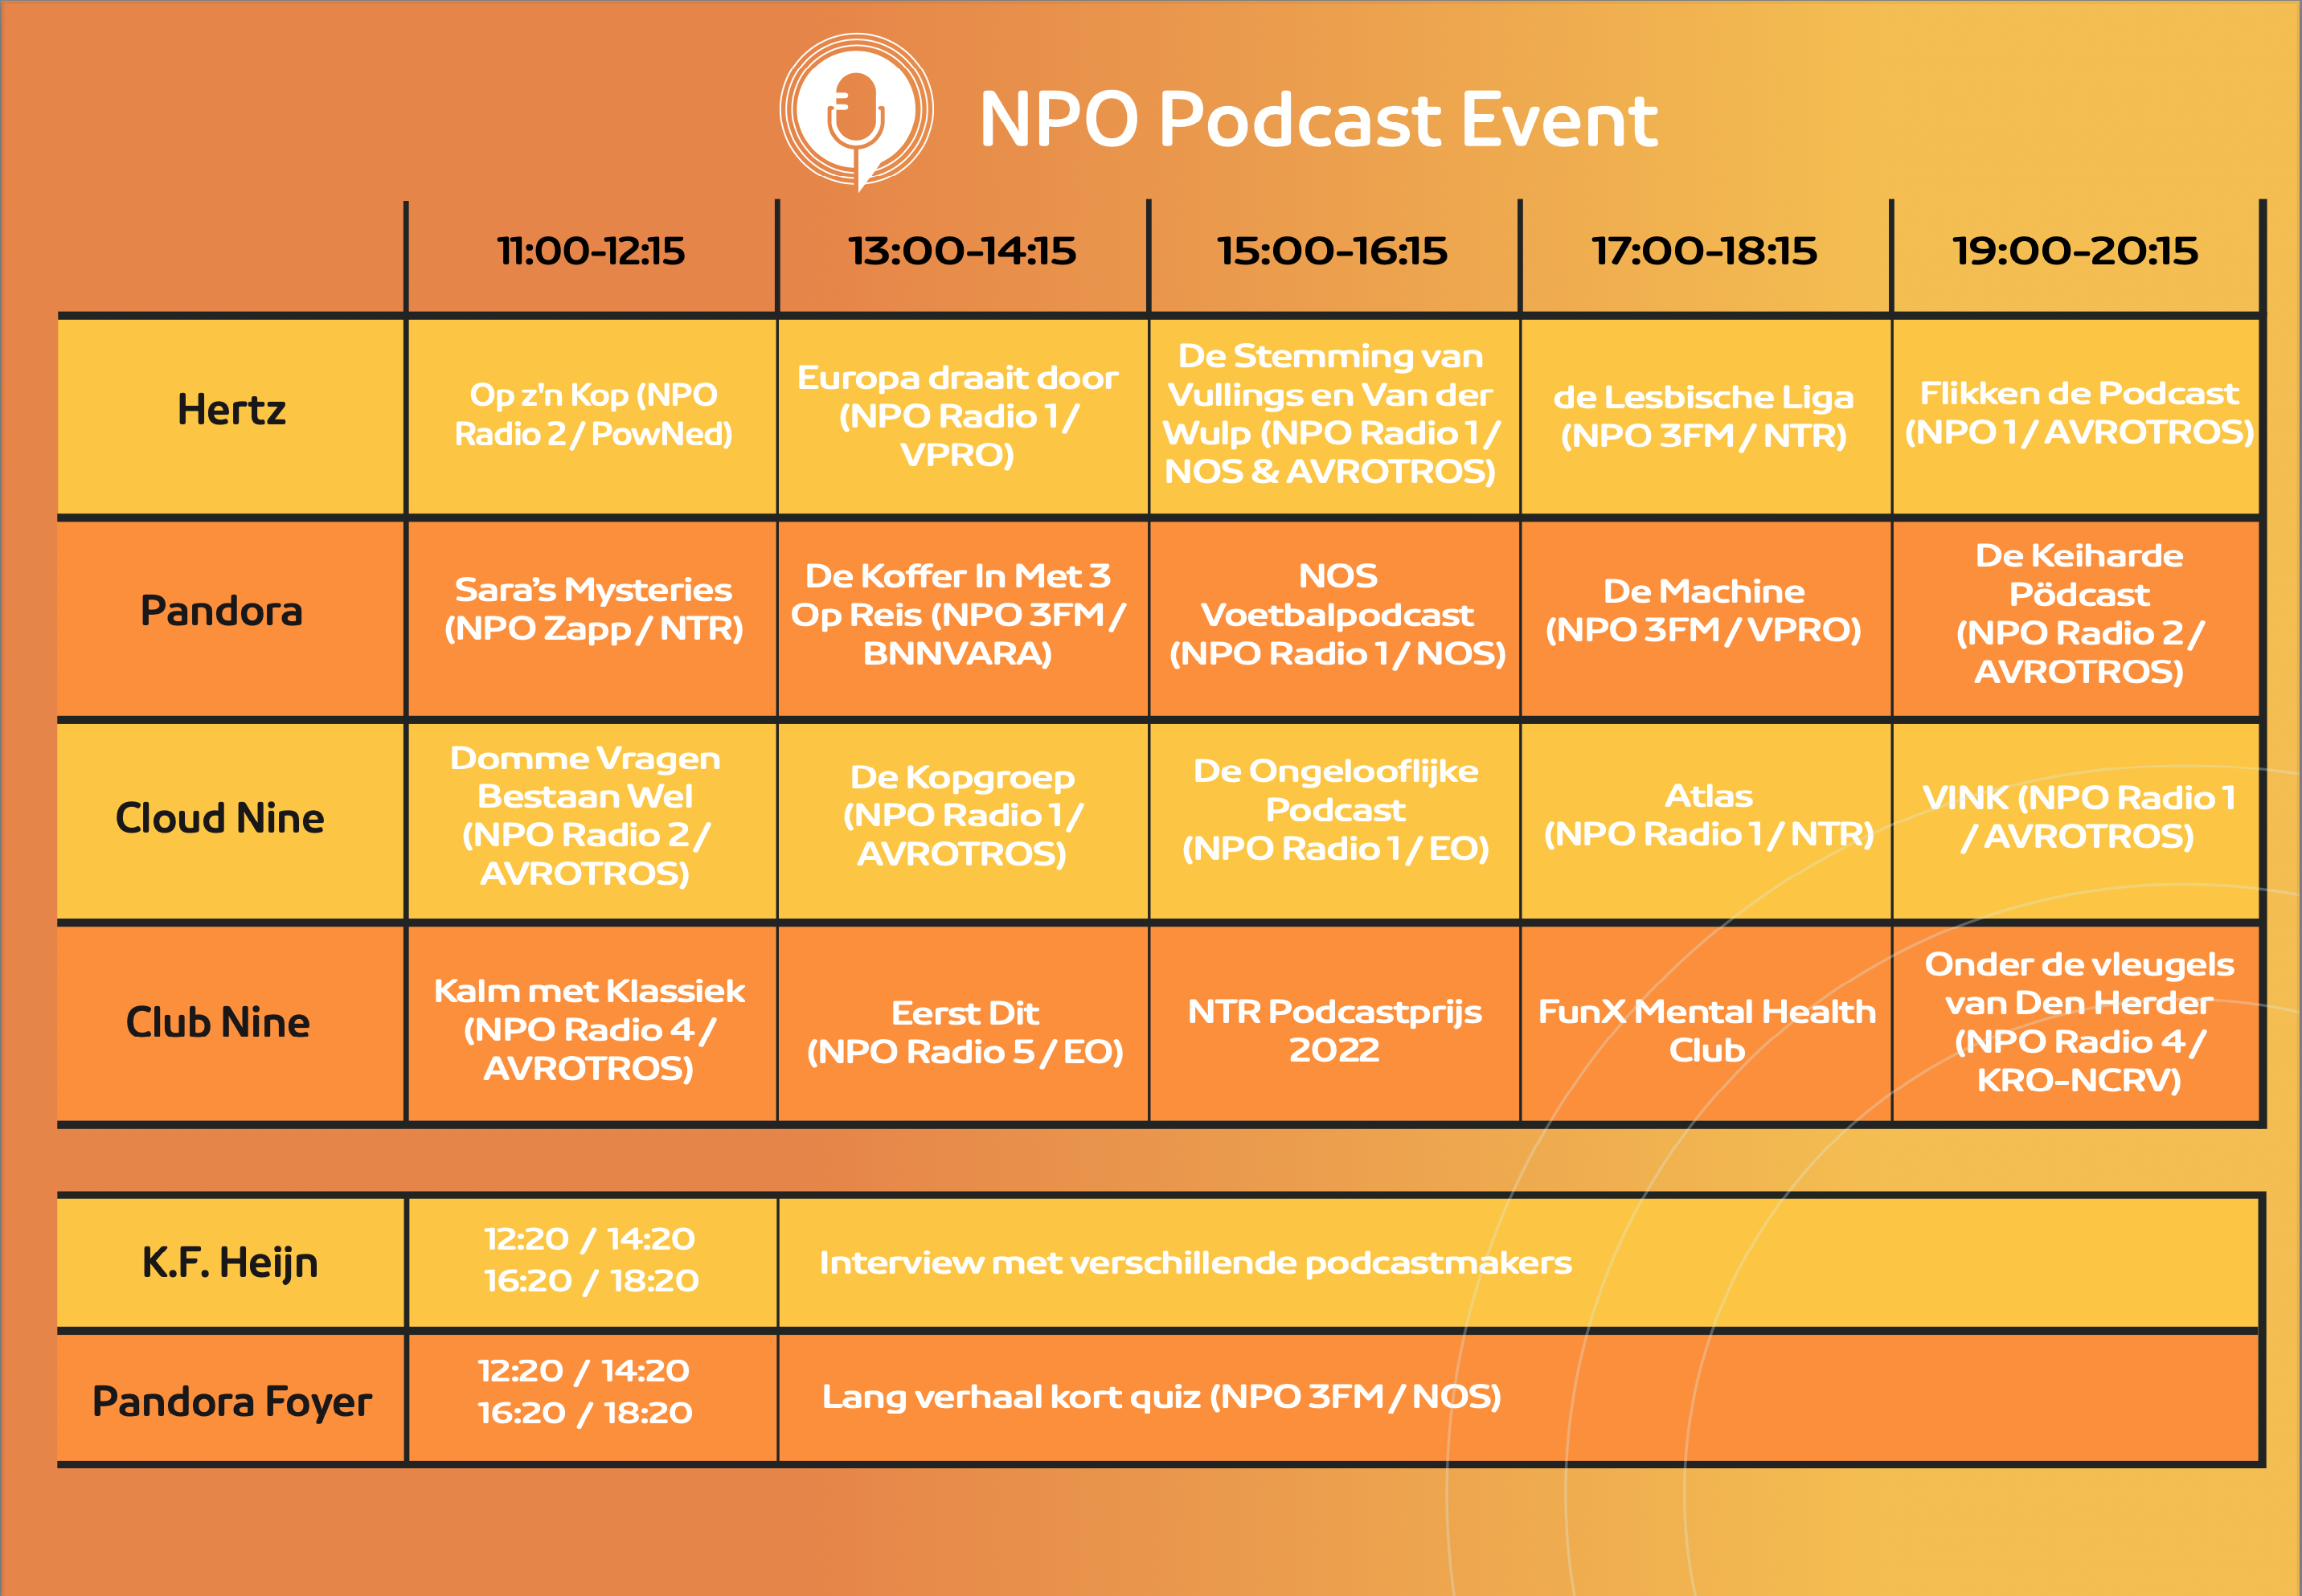 Timetbale NPO Podcast event 2022